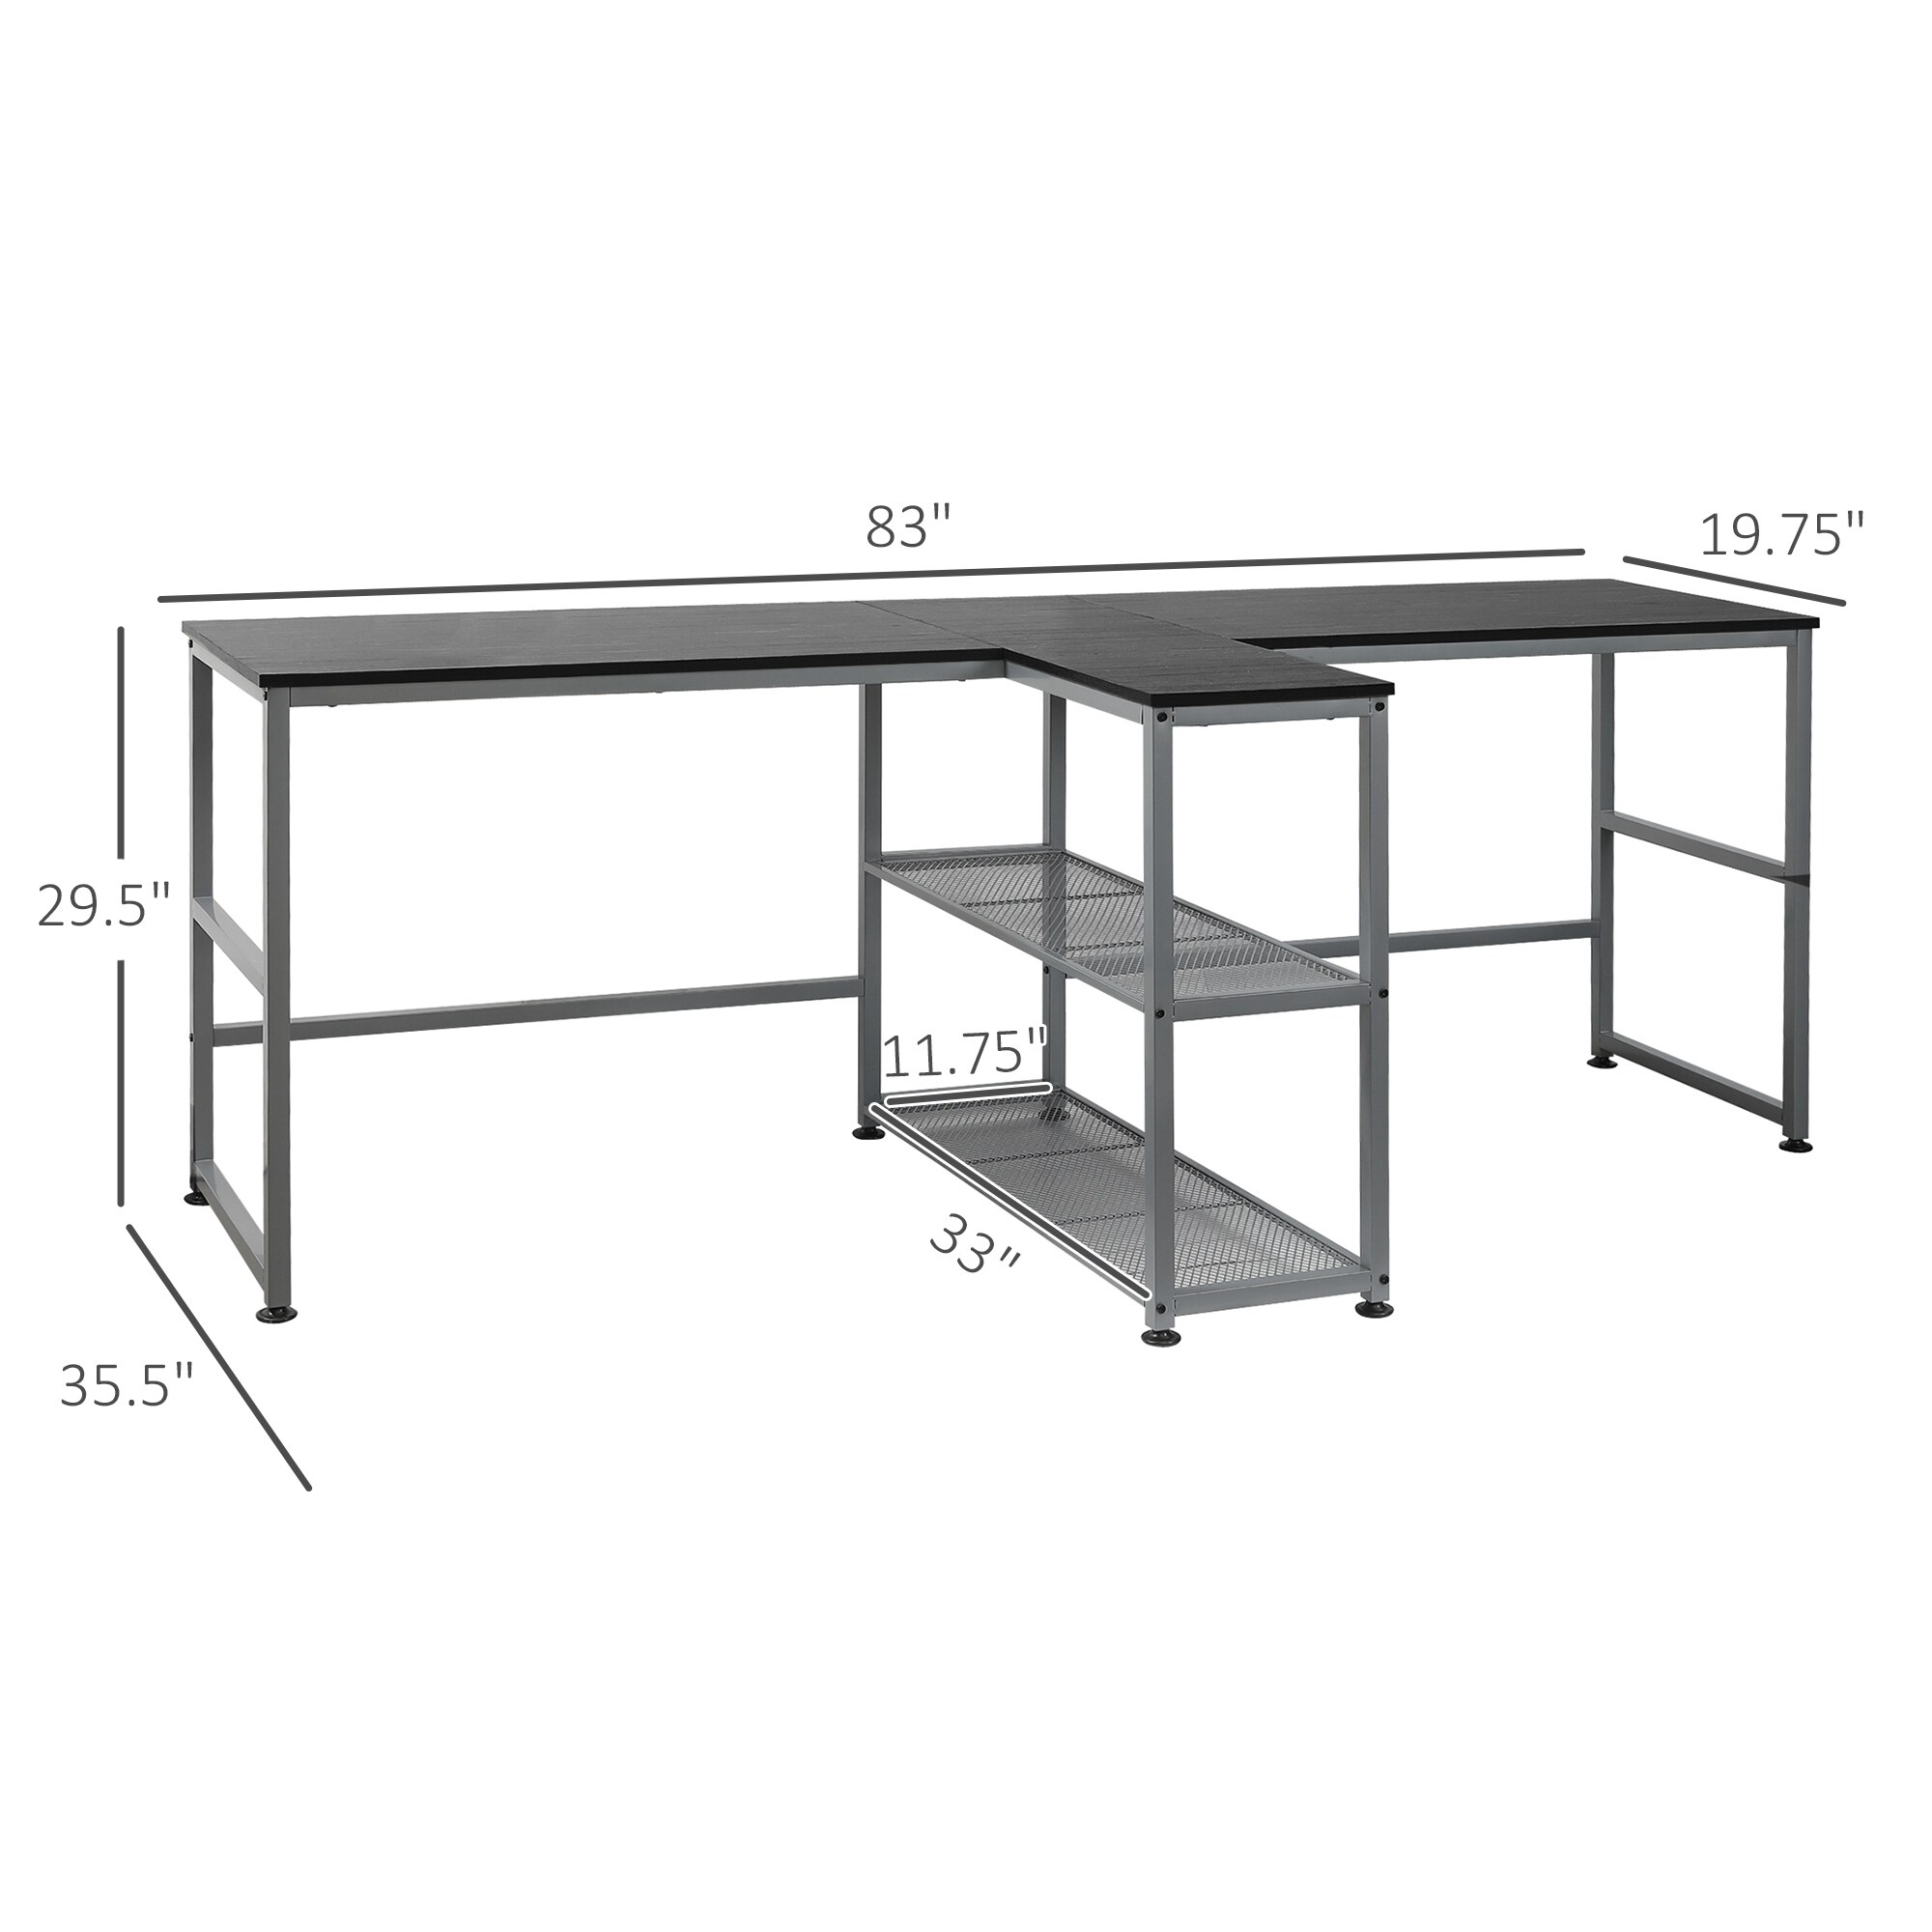 https://ak1.ostkcdn.com/images/products/is/images/direct/effb7fa8e226ceaebe475fc596c8a9de2915b574/HOMCOM-83%22-Two-Person-Computer-Desk-Workstation-with-Middle-Armrest-Shelf-and-2-Storage-Shelves.jpg